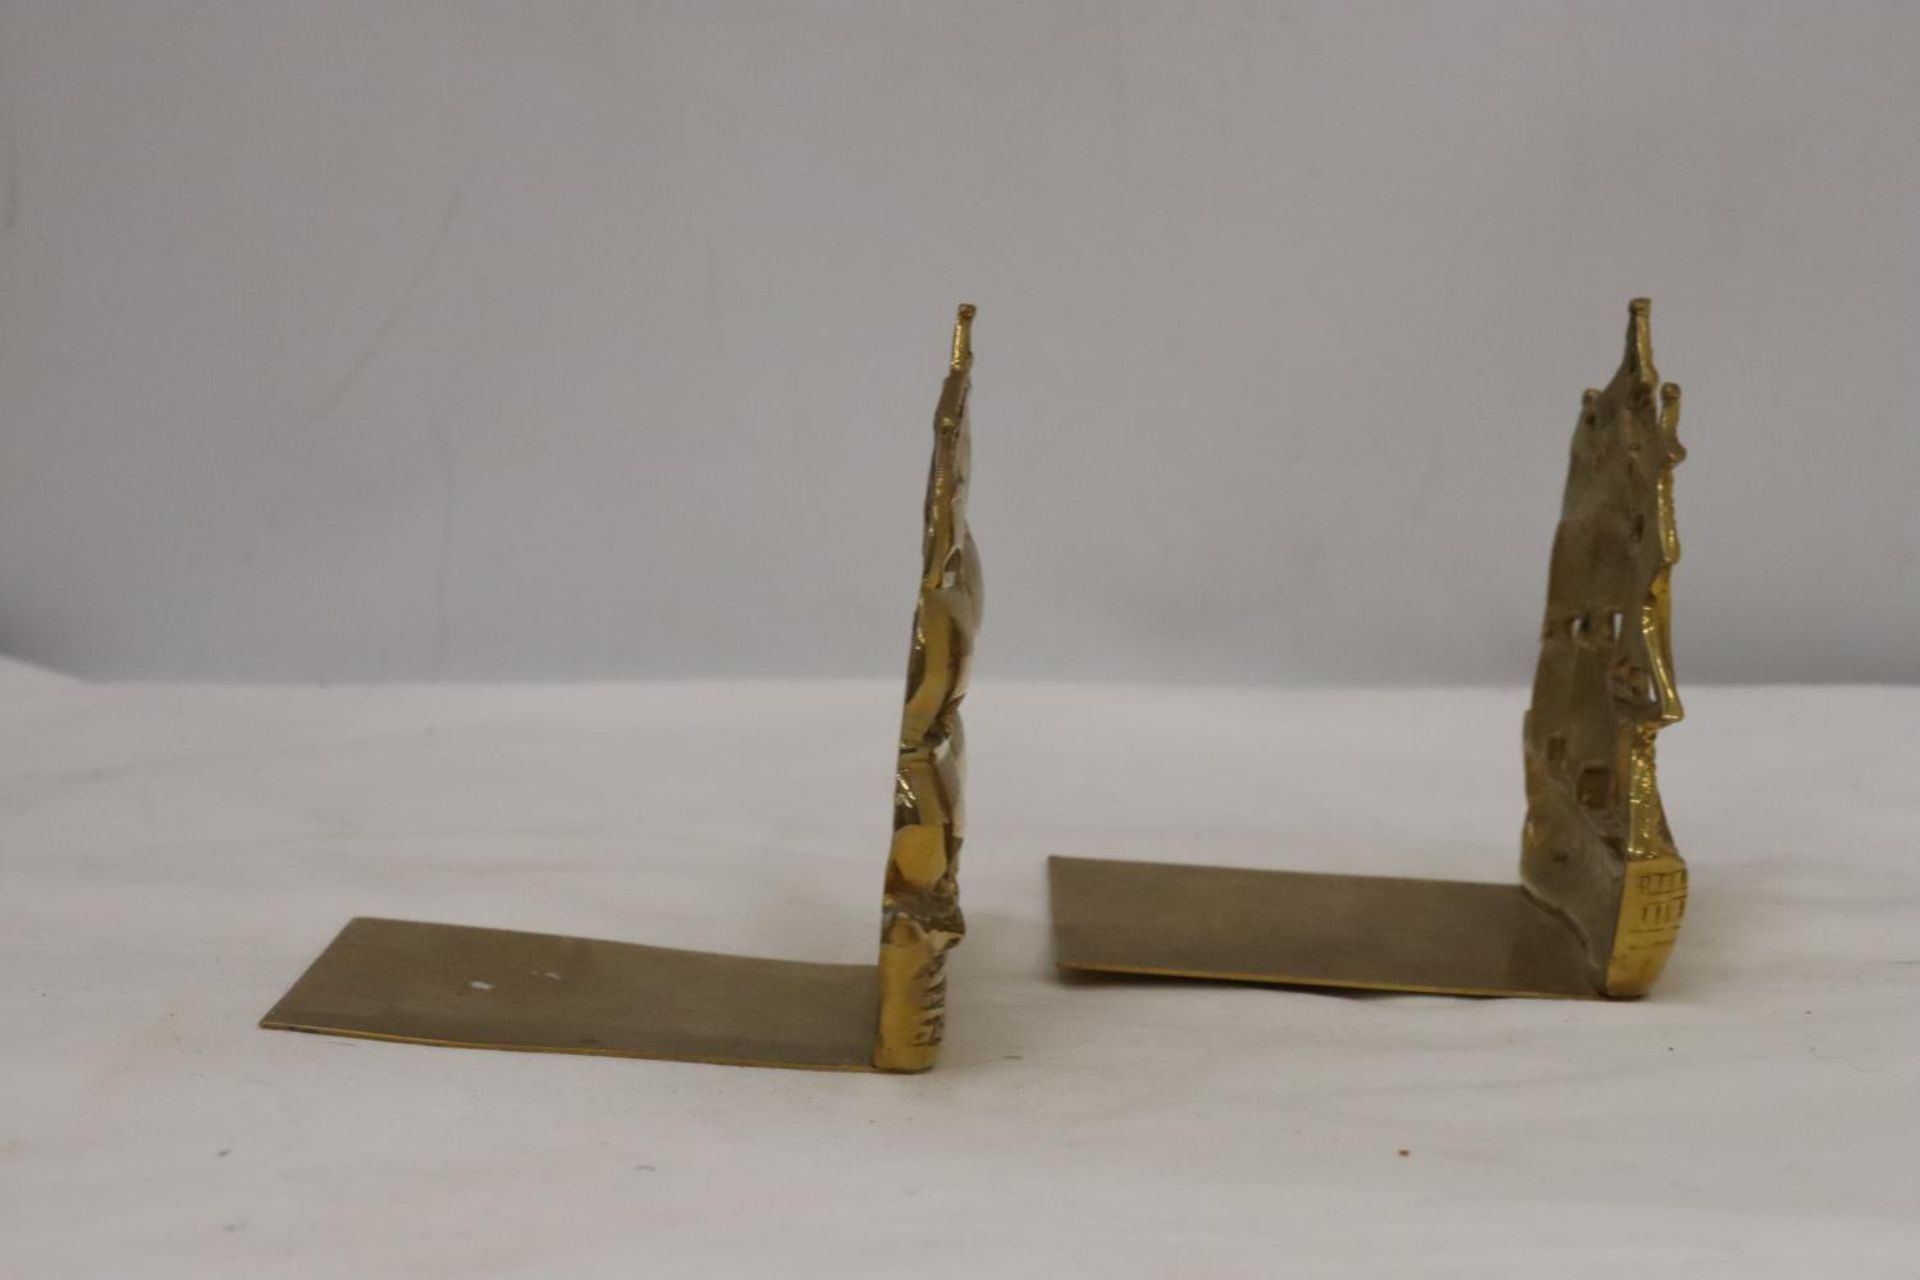 A PAIR OF VINTAGE BRASS SHIP BOOKENDS - Image 3 of 5